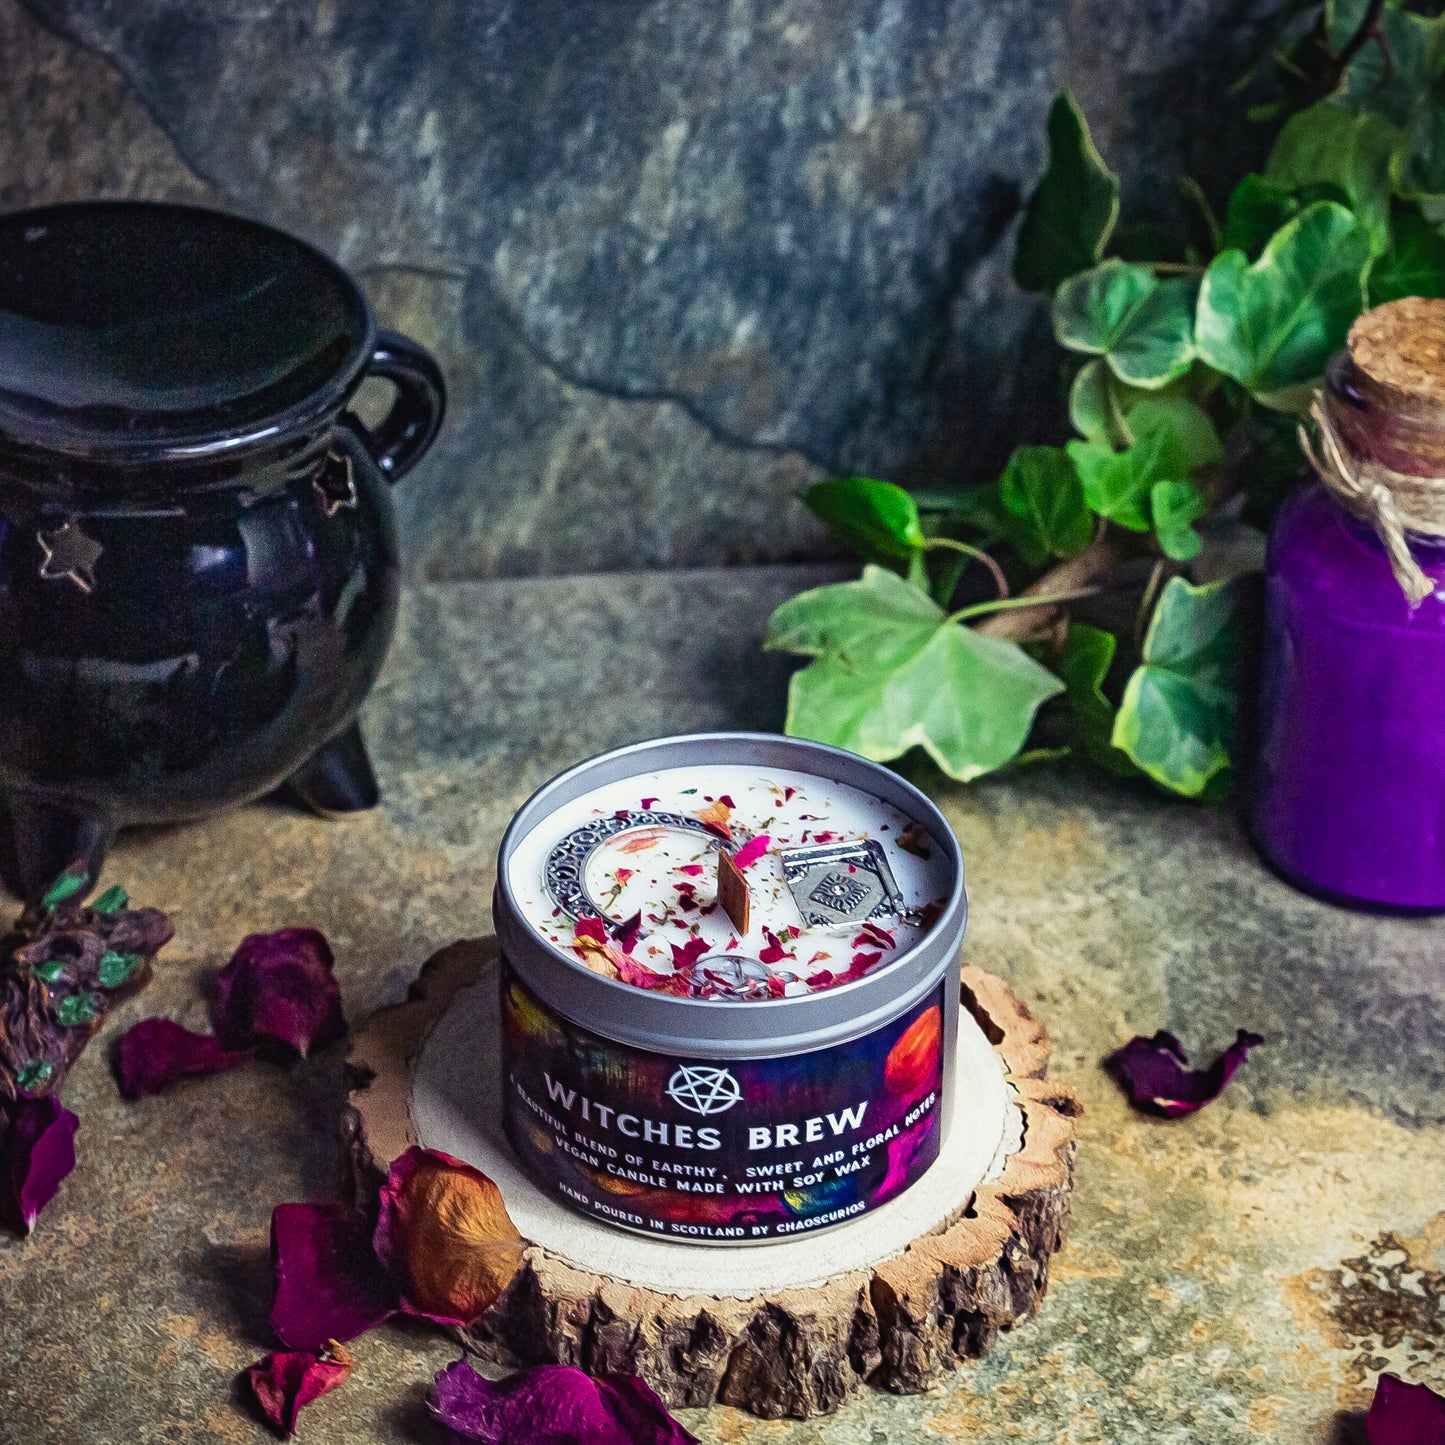 Witches Brew, Vegan Soy Candle, Witchy Aesthetic, Witchy Vibes, Pentacle Candle, Moon Candle, Book of Spells